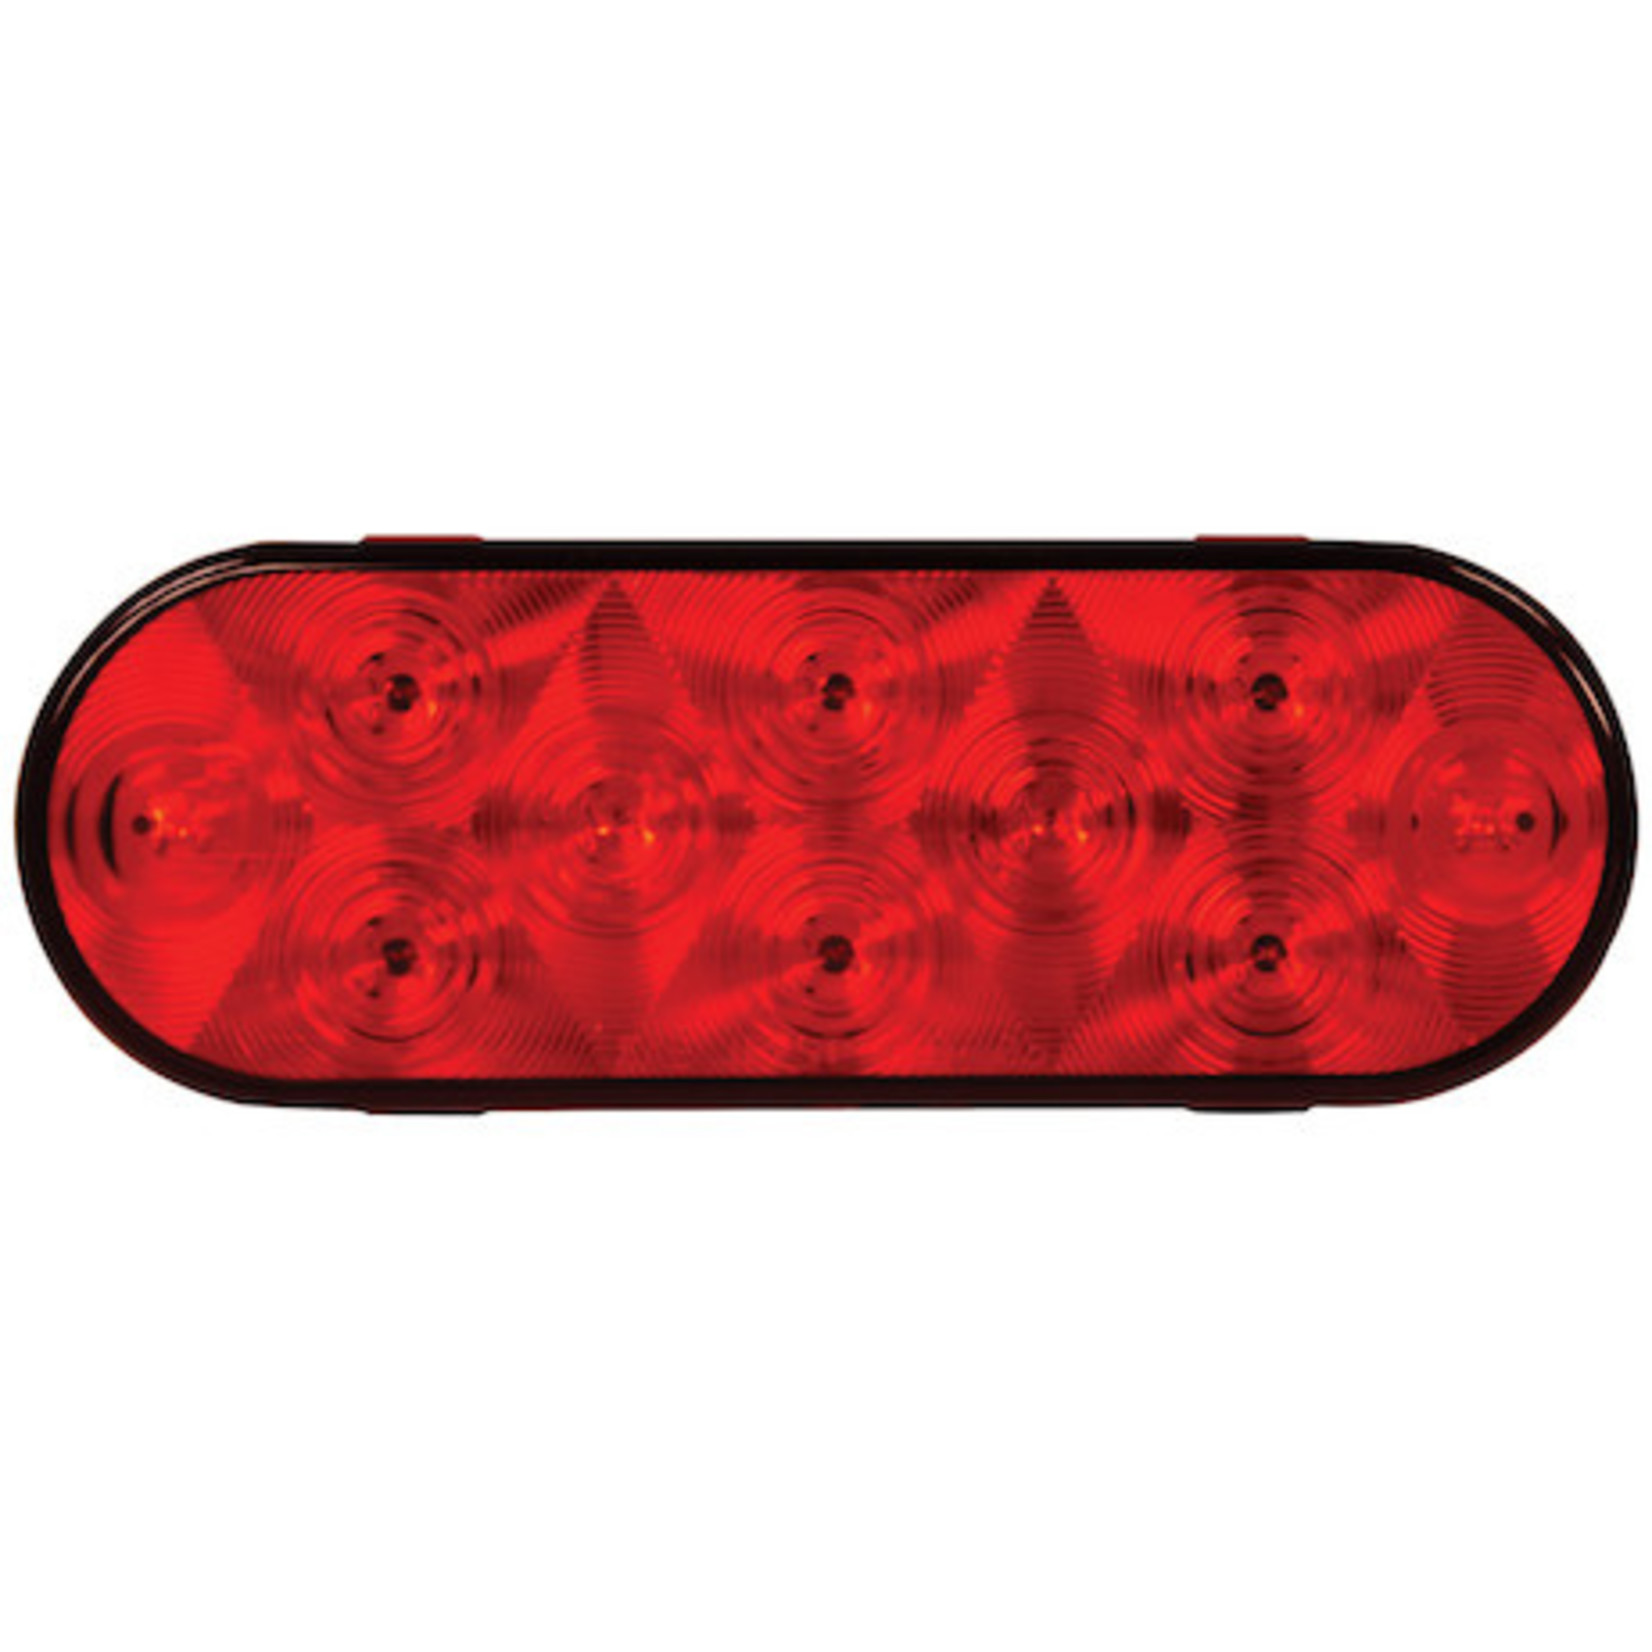 Buyers Products Company 6 Inch Red Oval Stop/Turn/Tail Light with 10 LEDs Kit (PL-3 Connection, Includes Grommet and Plug)